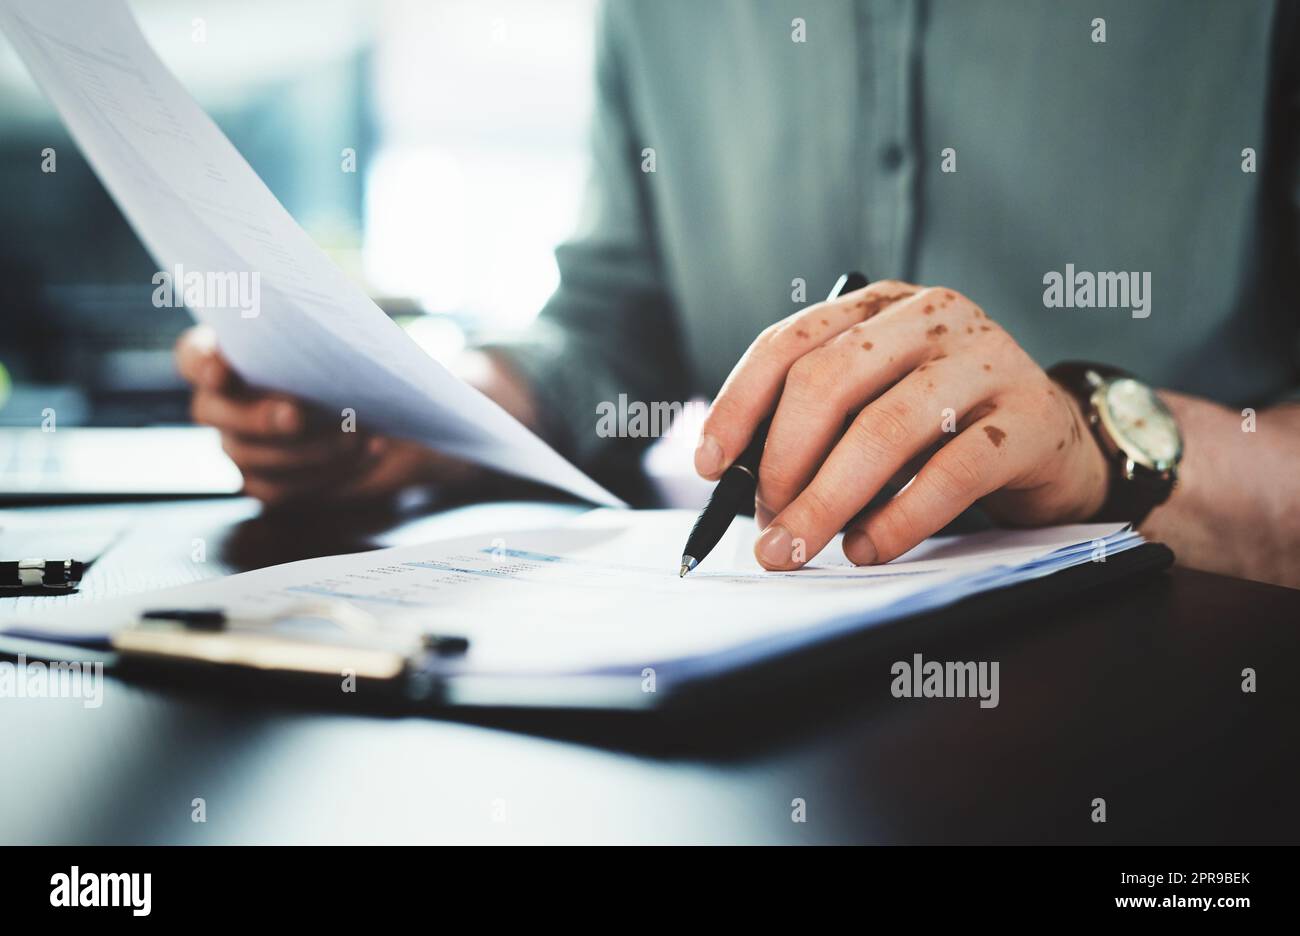 Sorting out some business. an unrecognizazble businessman doing paperwork in an office at work. Stock Photo